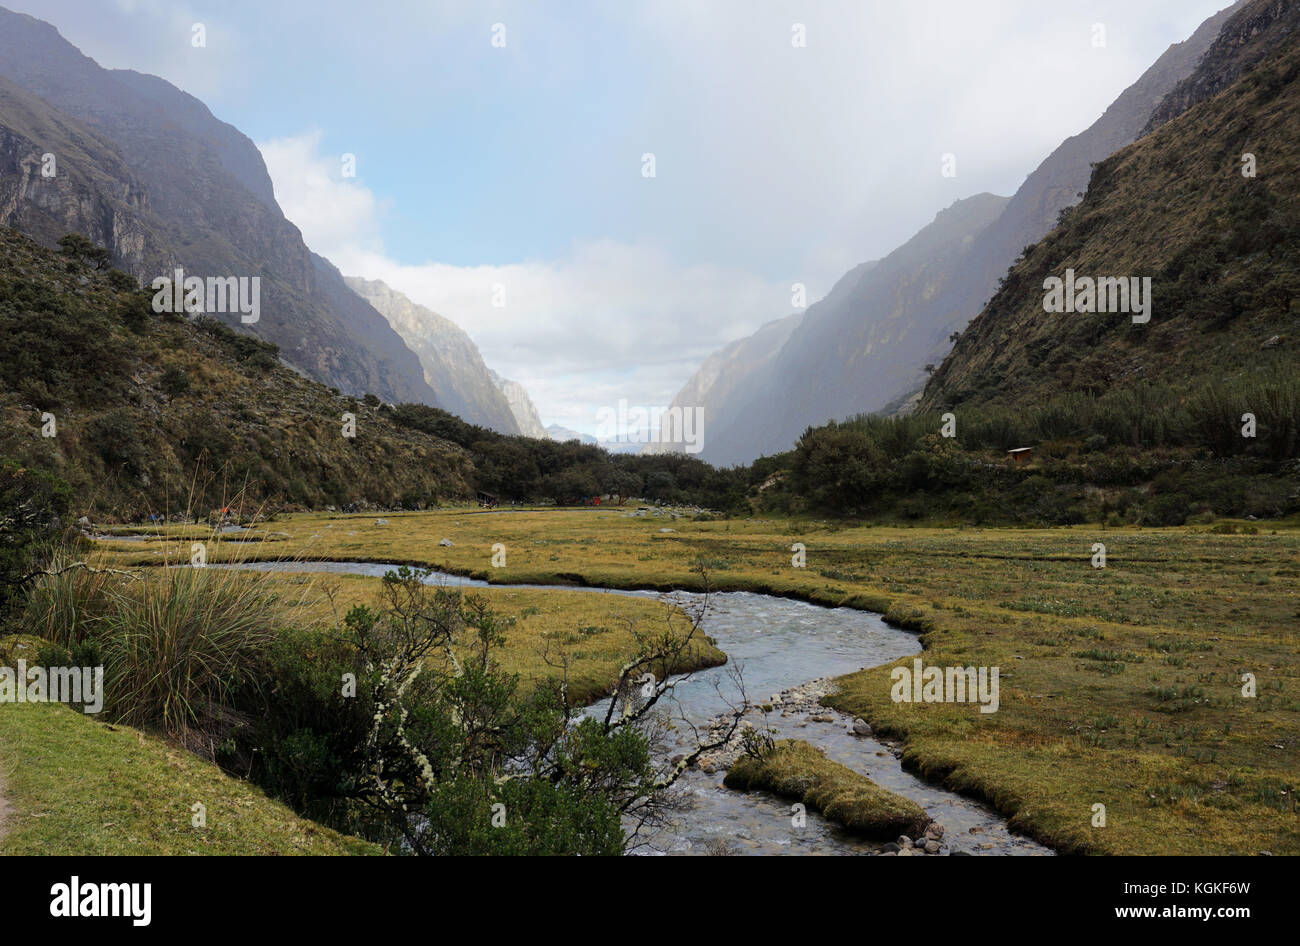 Breathtaking Landscapes of the Huascaran National Park located in the area of Yungay in Peru. Stock Photo